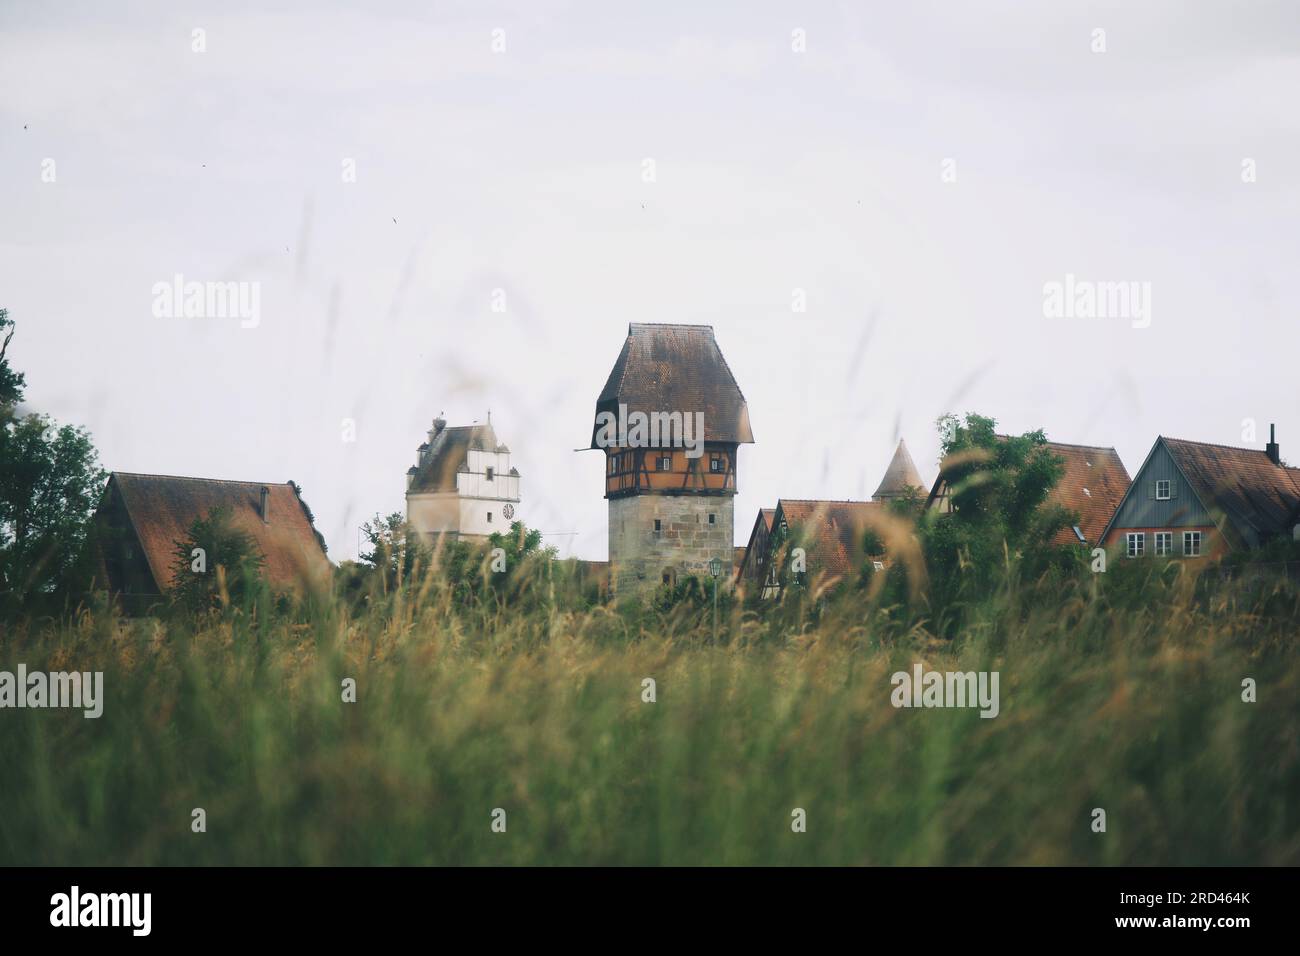 A photo of buildings in the german town Dinkelsbühl. In front of the buildings there is a large field of grass. Stock Photo